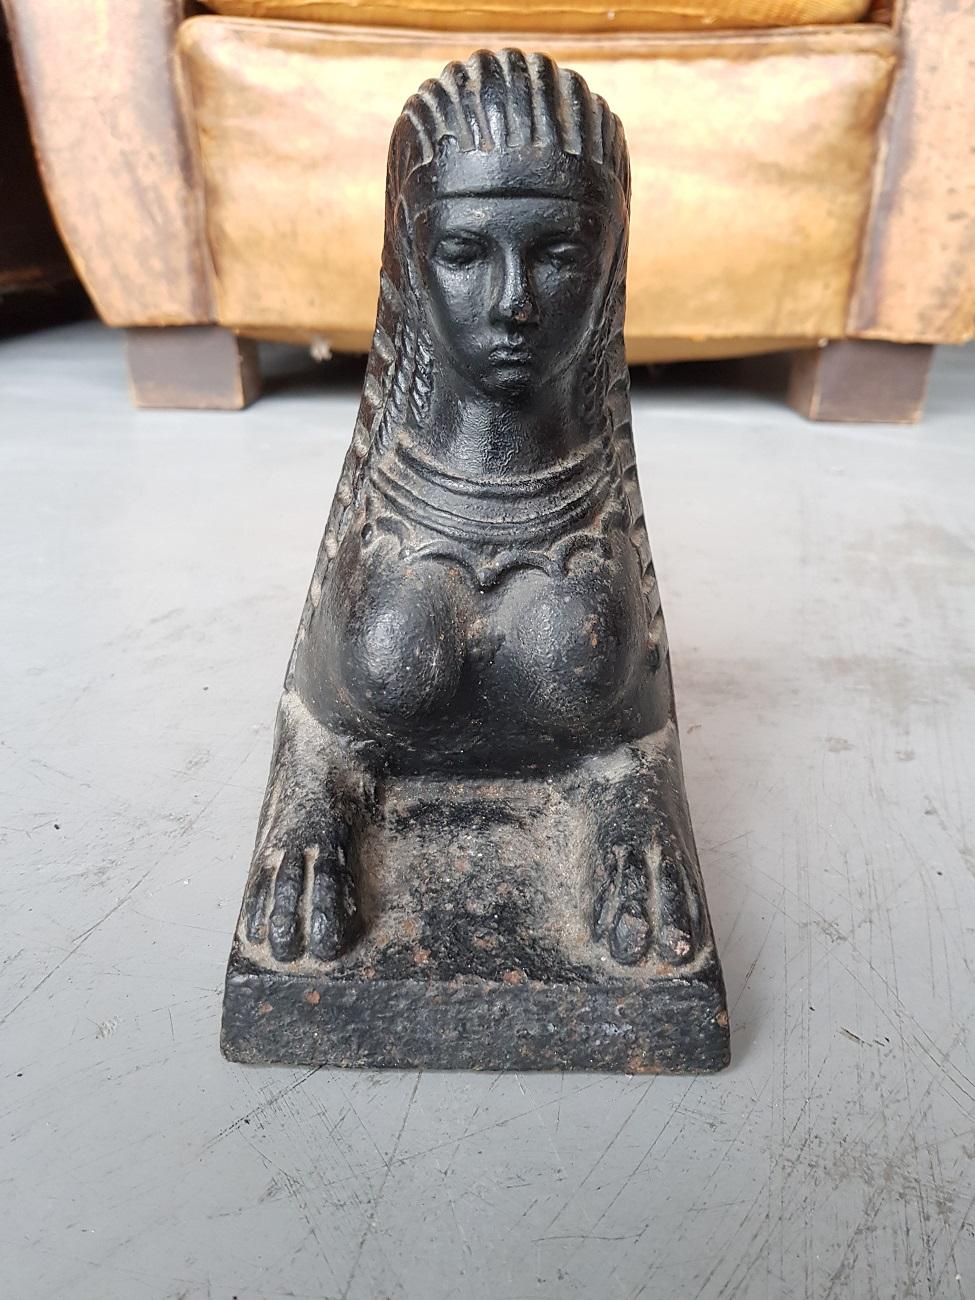 Set of vintage French cast chenets / fireplace bucks with an image of a Sphinx, mid-20th century.

The measurements are,
Depth 48.5 cm/ 19 inch.
Width 11 cm/ 4.3 inch.
Height 19 cm/ 7.4 inch.
 